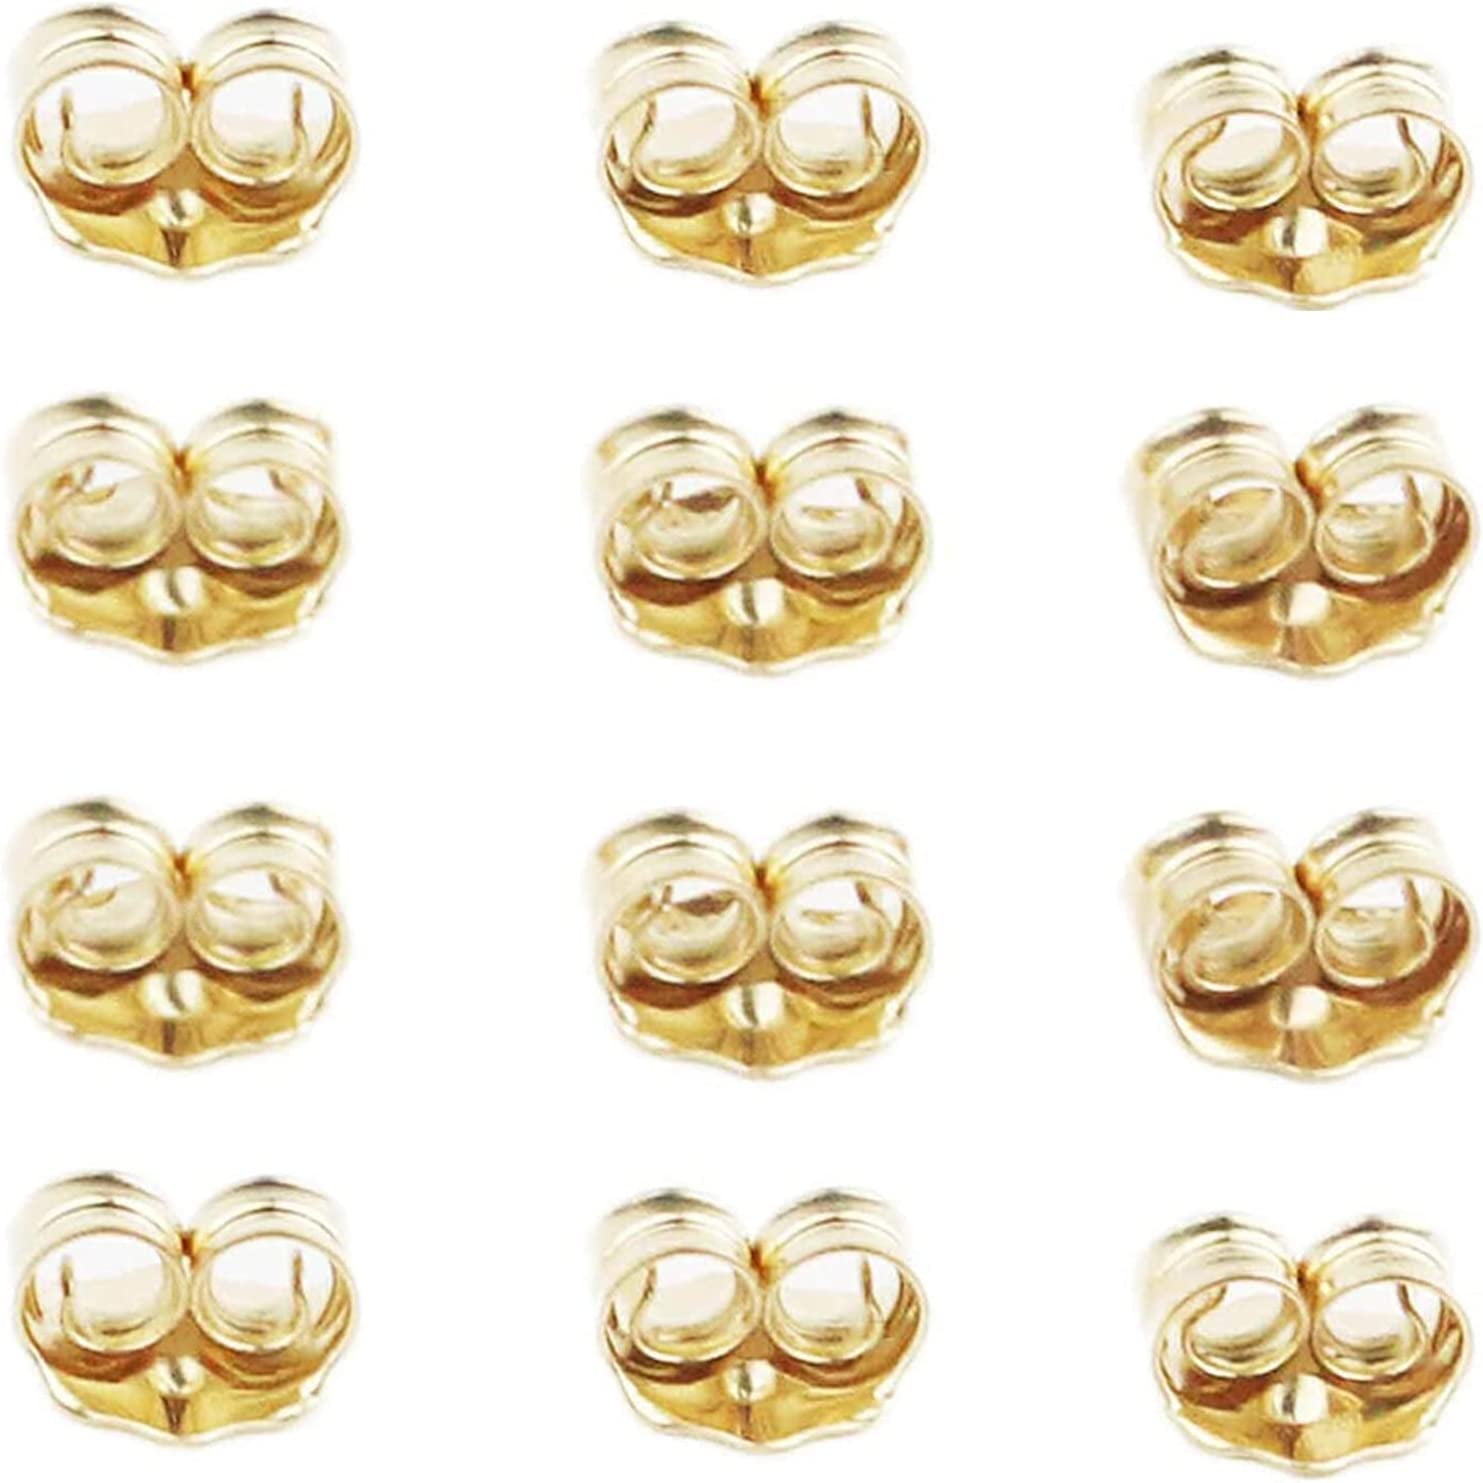 monochef 10pcs/5 Pairs 14K Yellow Gold Earring Backs Replacement Secure Ear  Locking for Stud Earrings Ear Nut for Posts, 5x6mm 